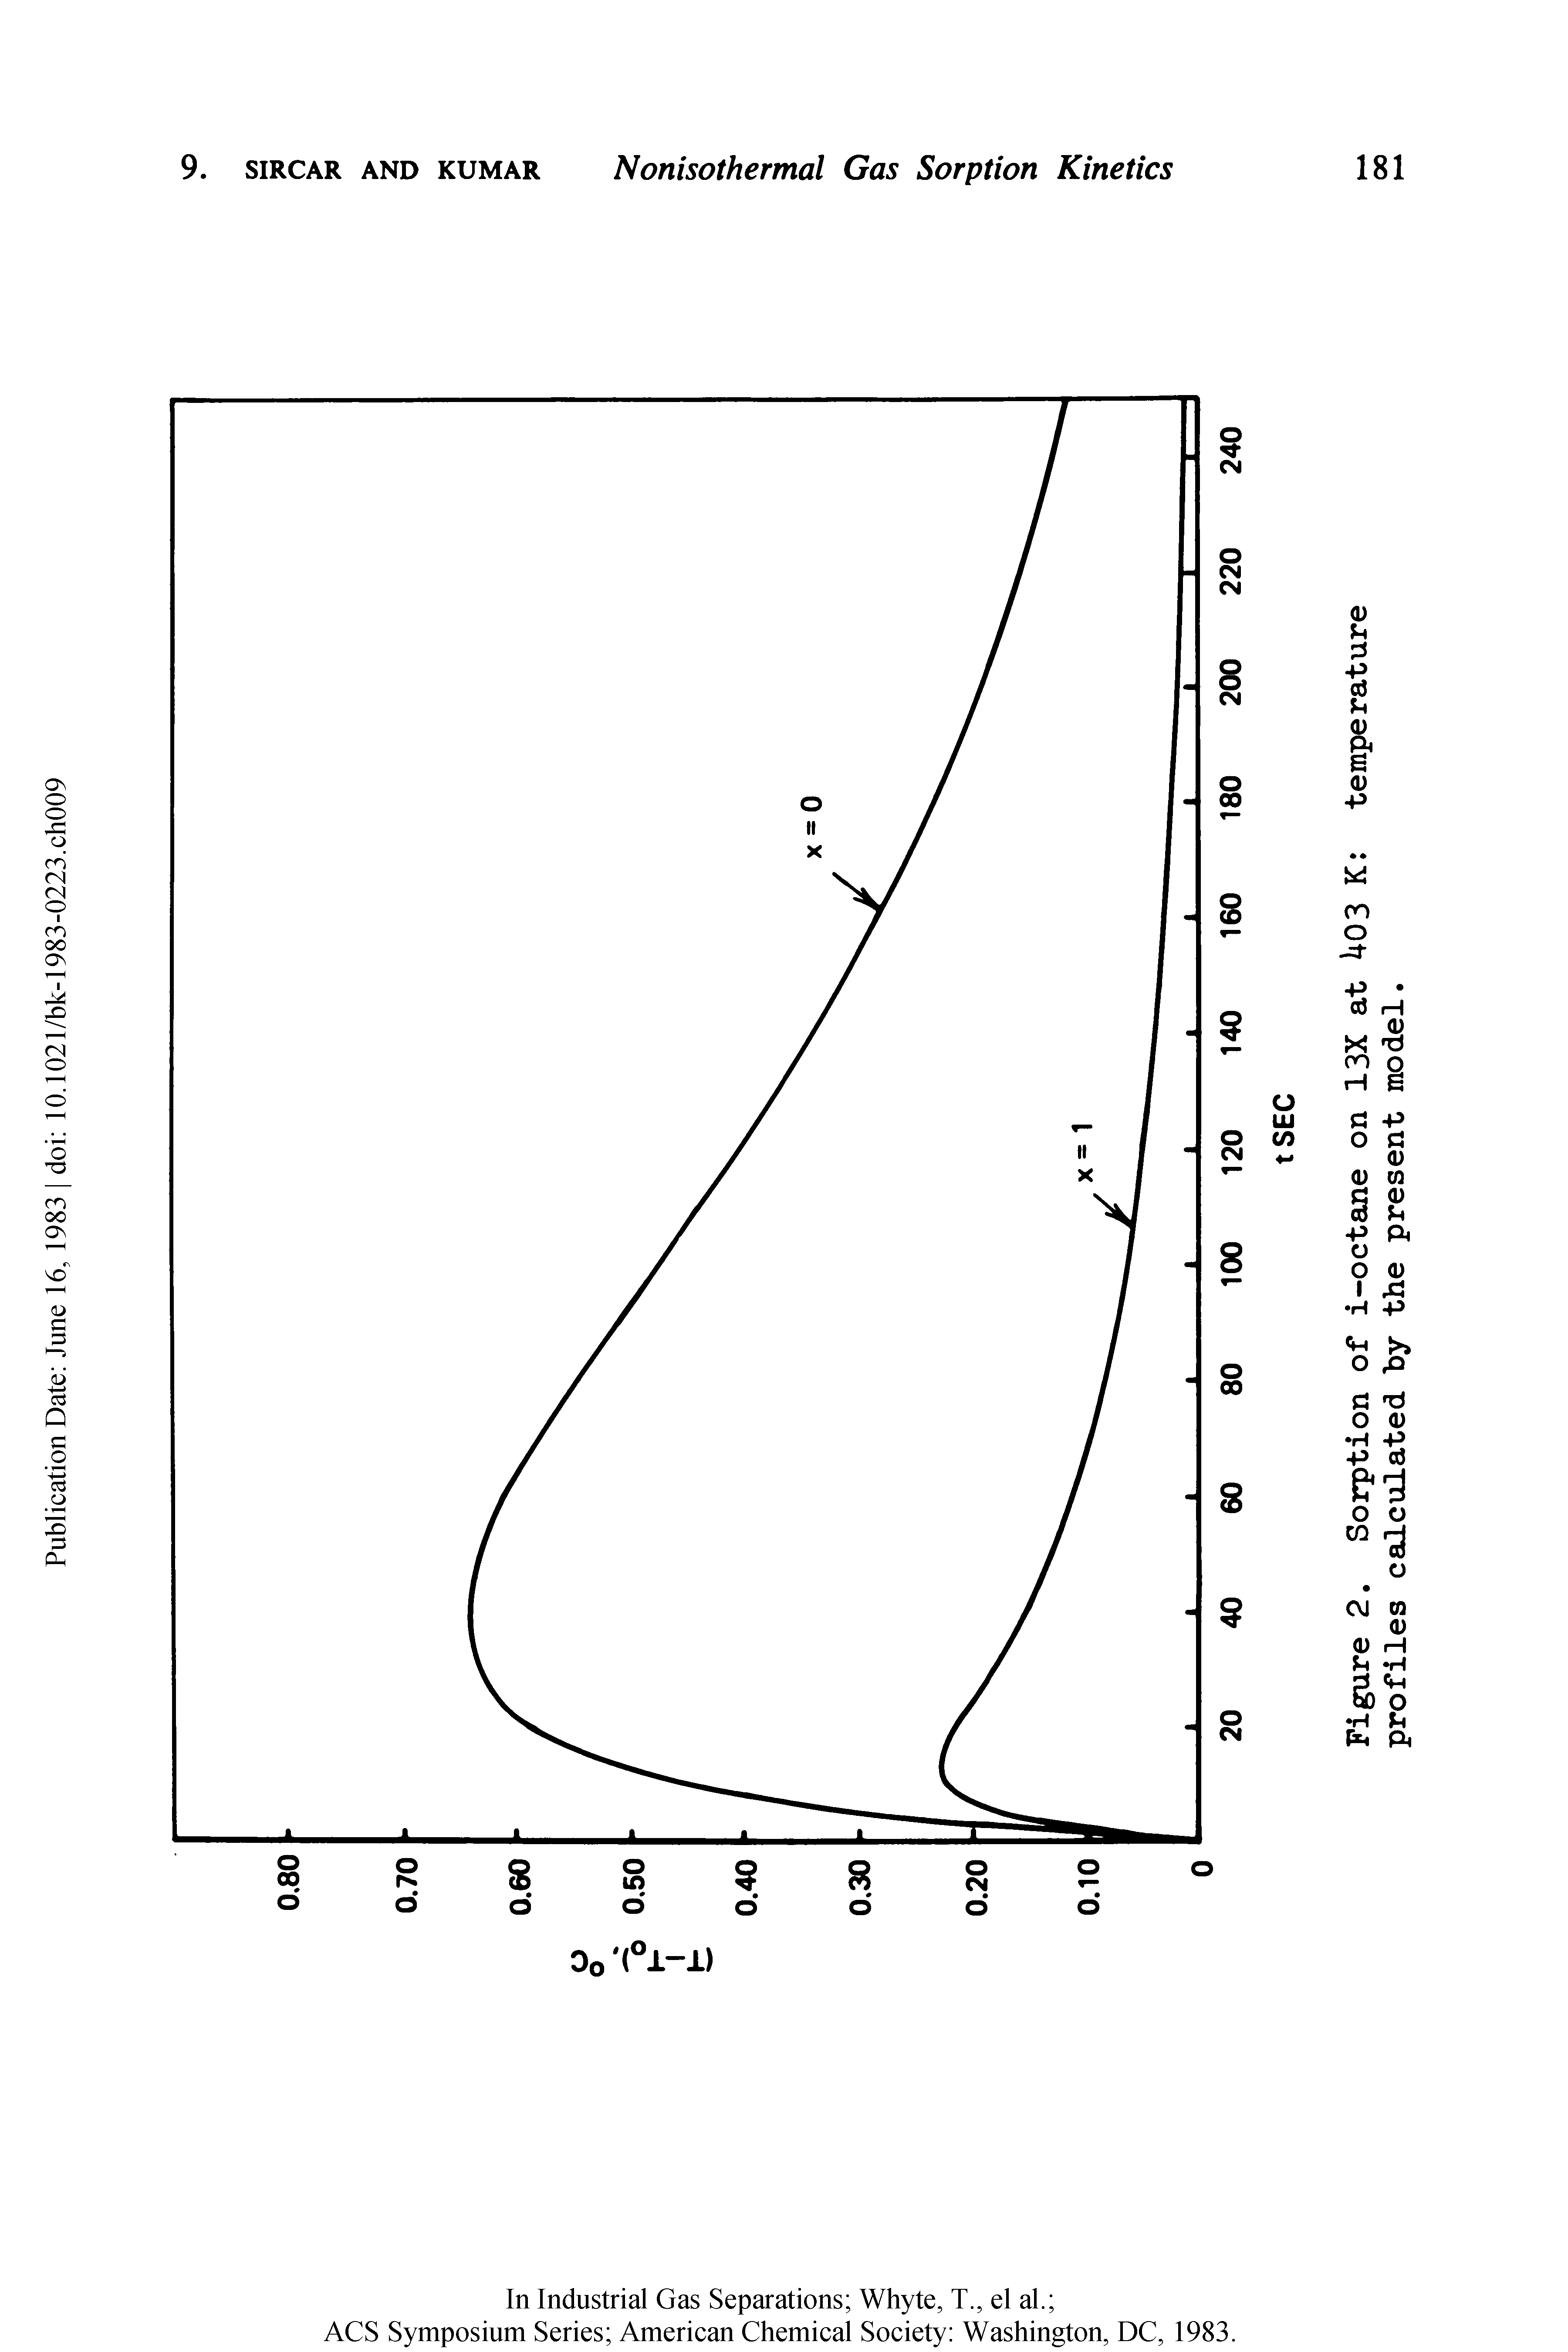 Figure 2. Sorption of i-octane on 13X at U03 K temperature profiles calculated by the present model.